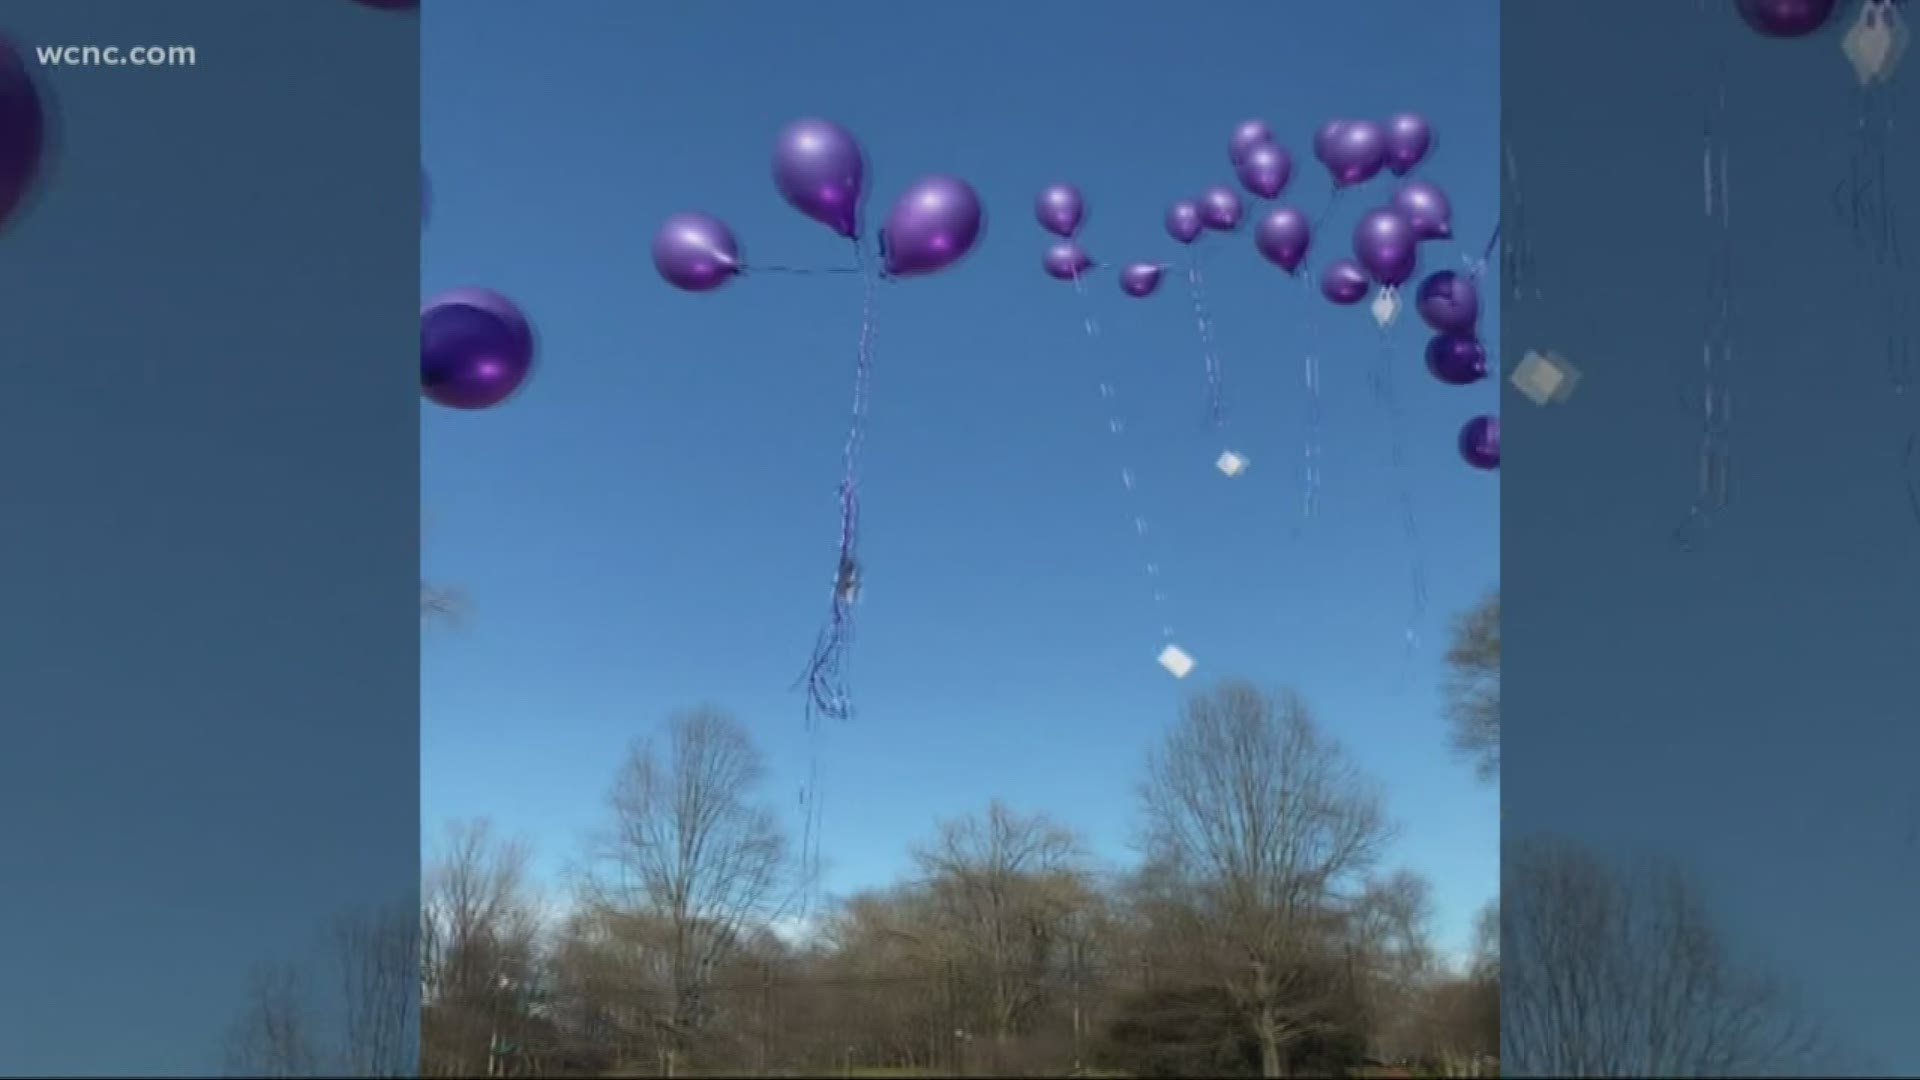 2019 was a deadly year in the Queen City, with 108 homicides in Charlotte. On New Year's Day, over 100 balloons were released to remember the victims.